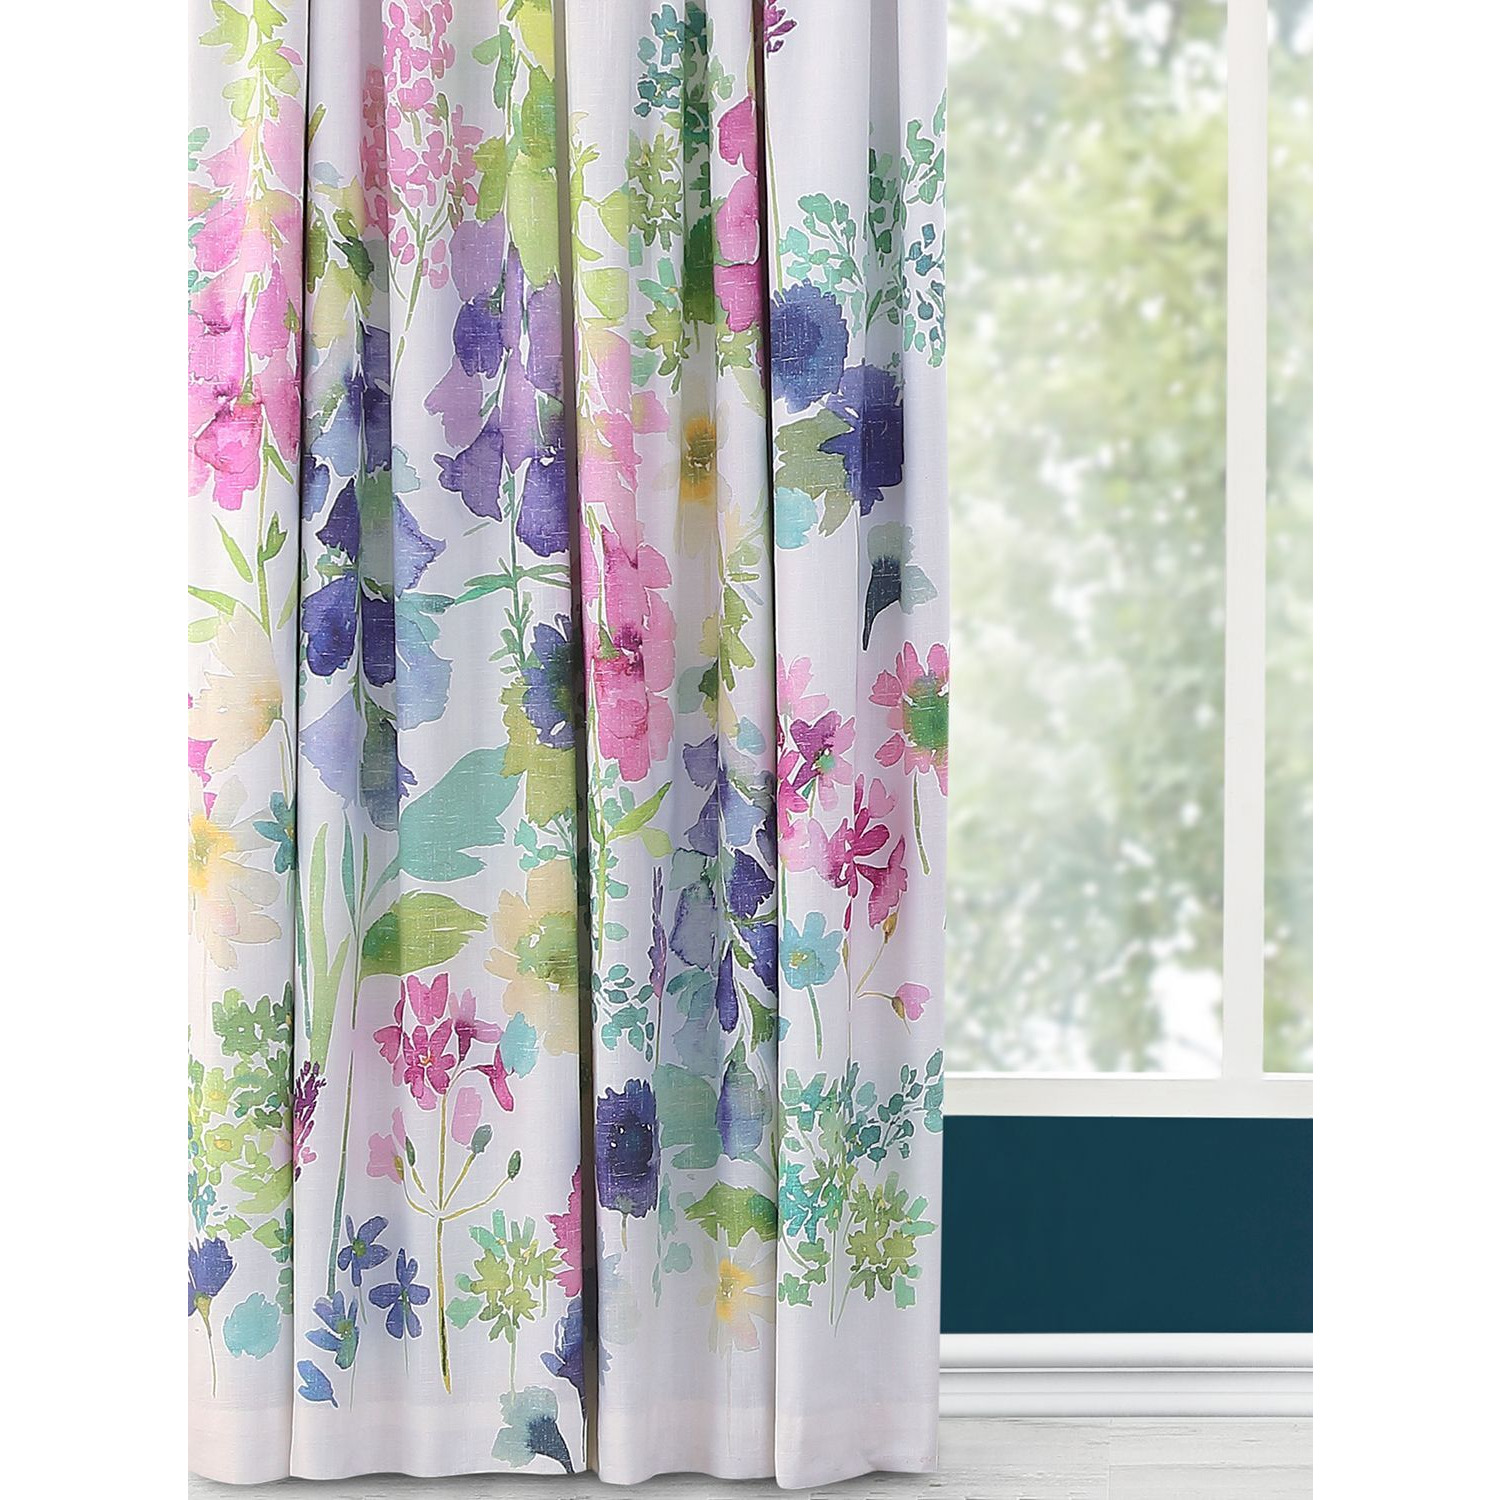 bluebellgray Foxglove Pair Blackout/Thermal Lined Pencil Pleat Curtains, Multi - image 1